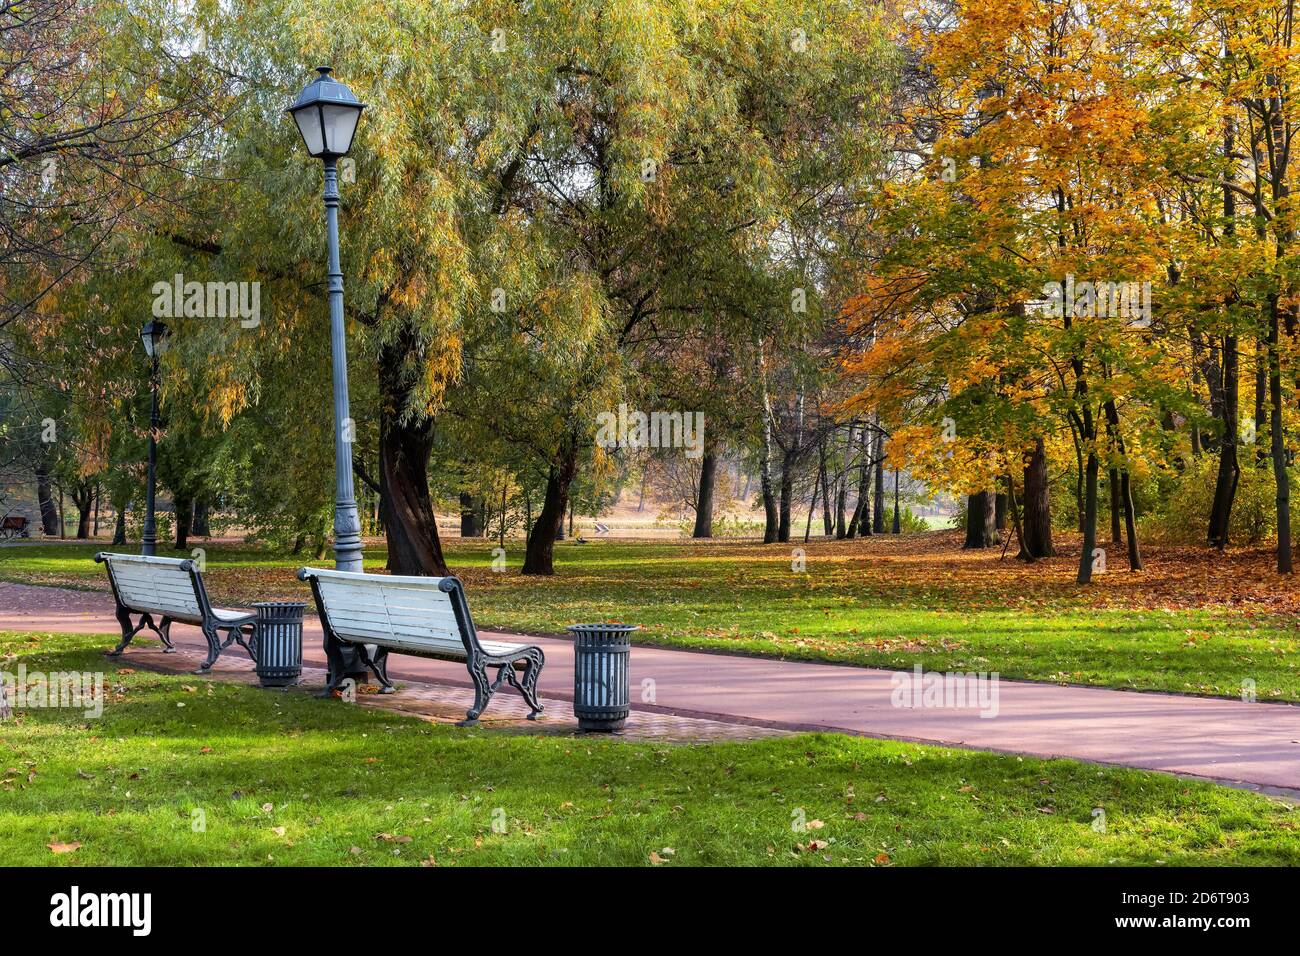 Autumn alley in a public park with colorful trees Stock Photo